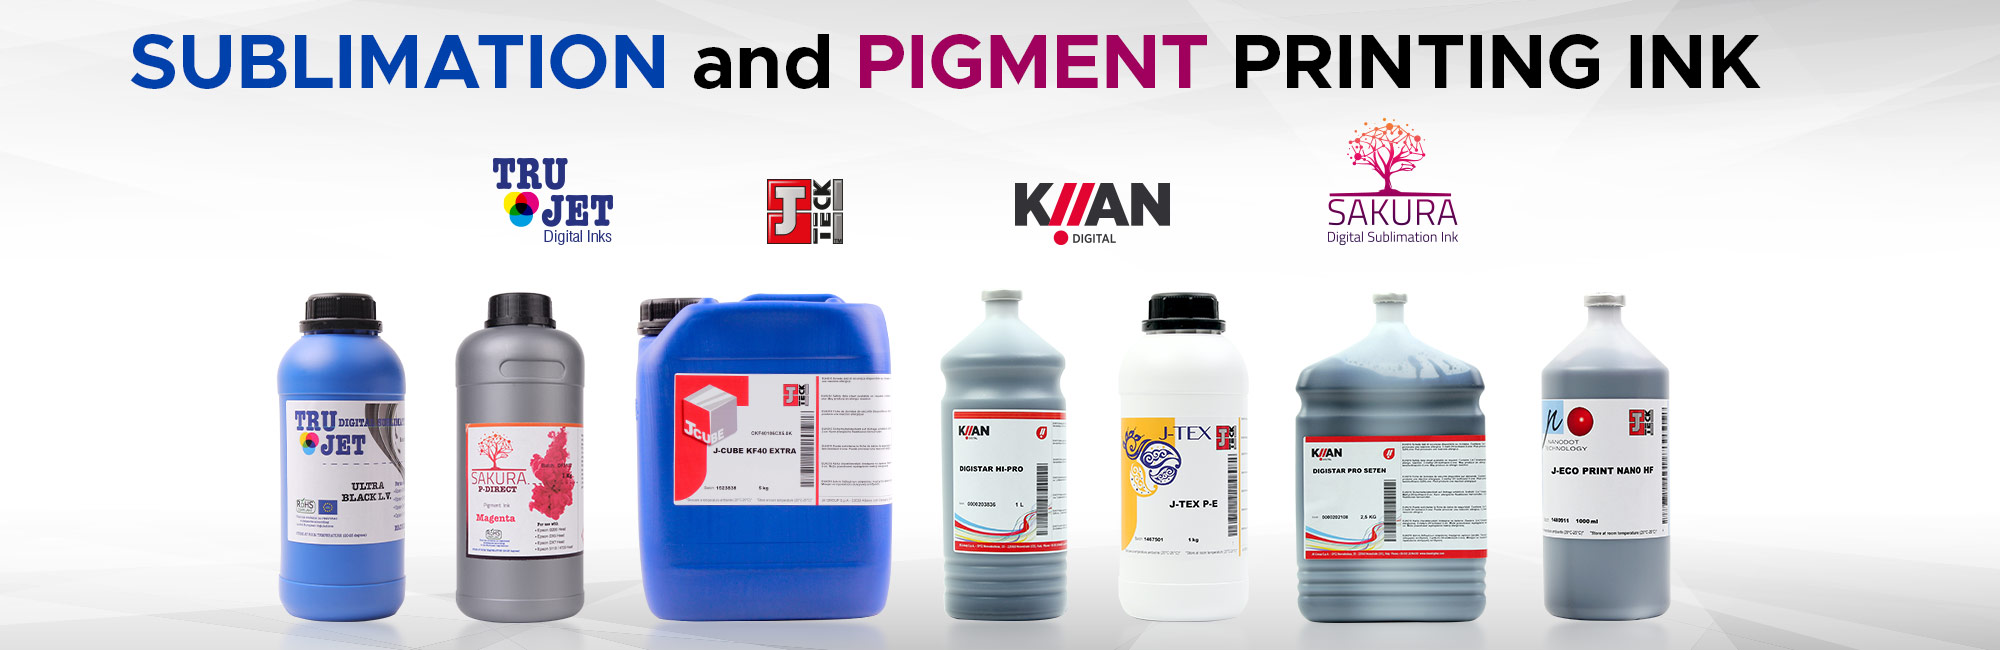 Sublimation and Pigment Printing Ink